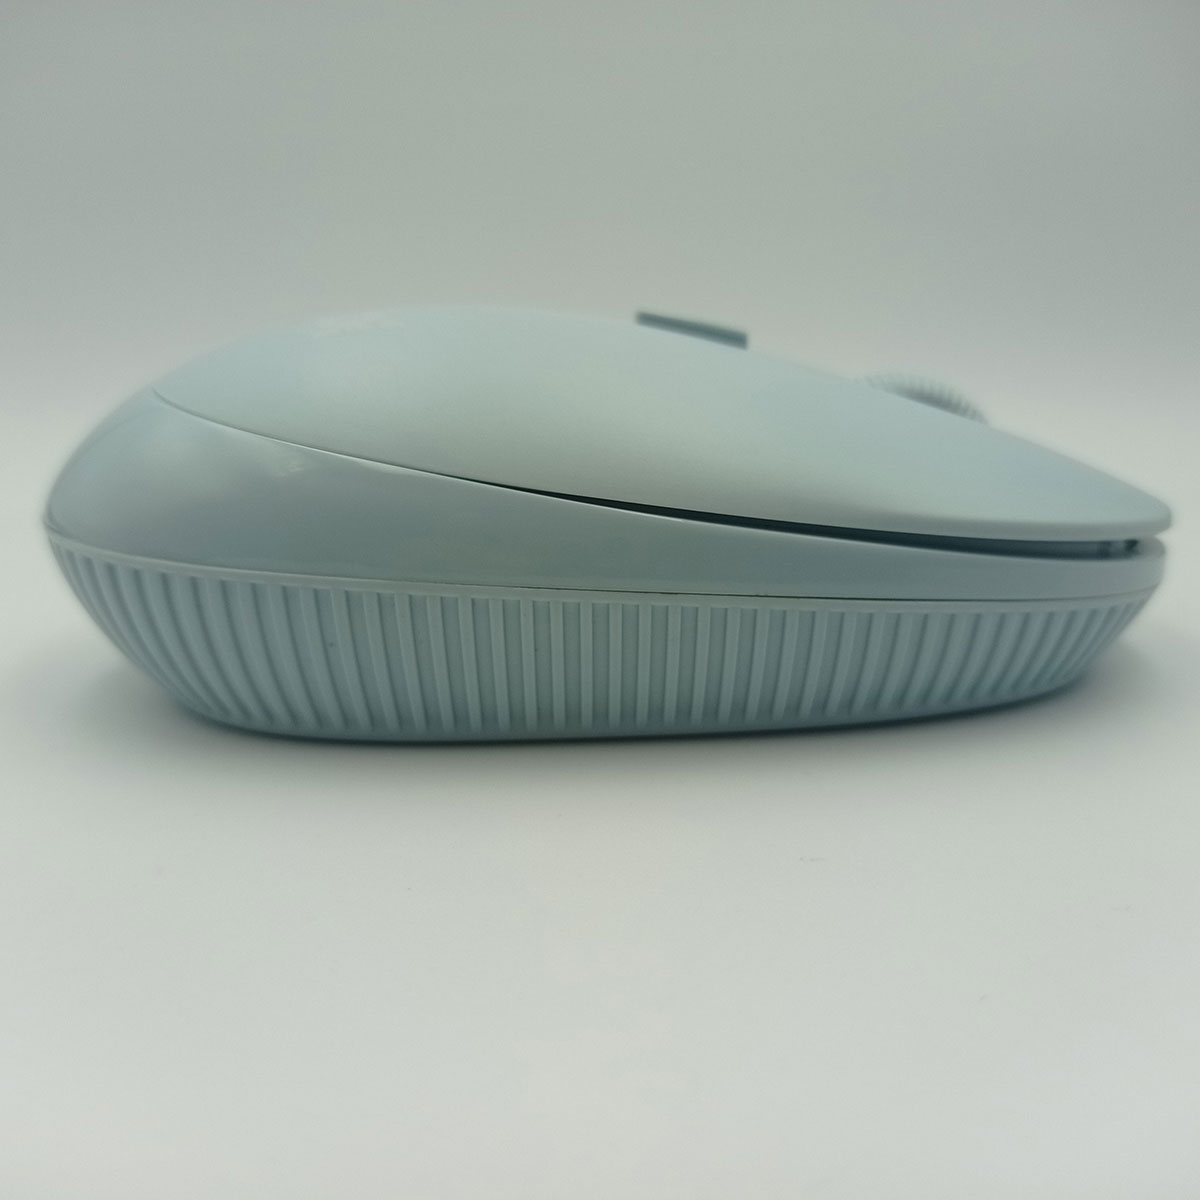 nm71-wireless-mouse-blue-04